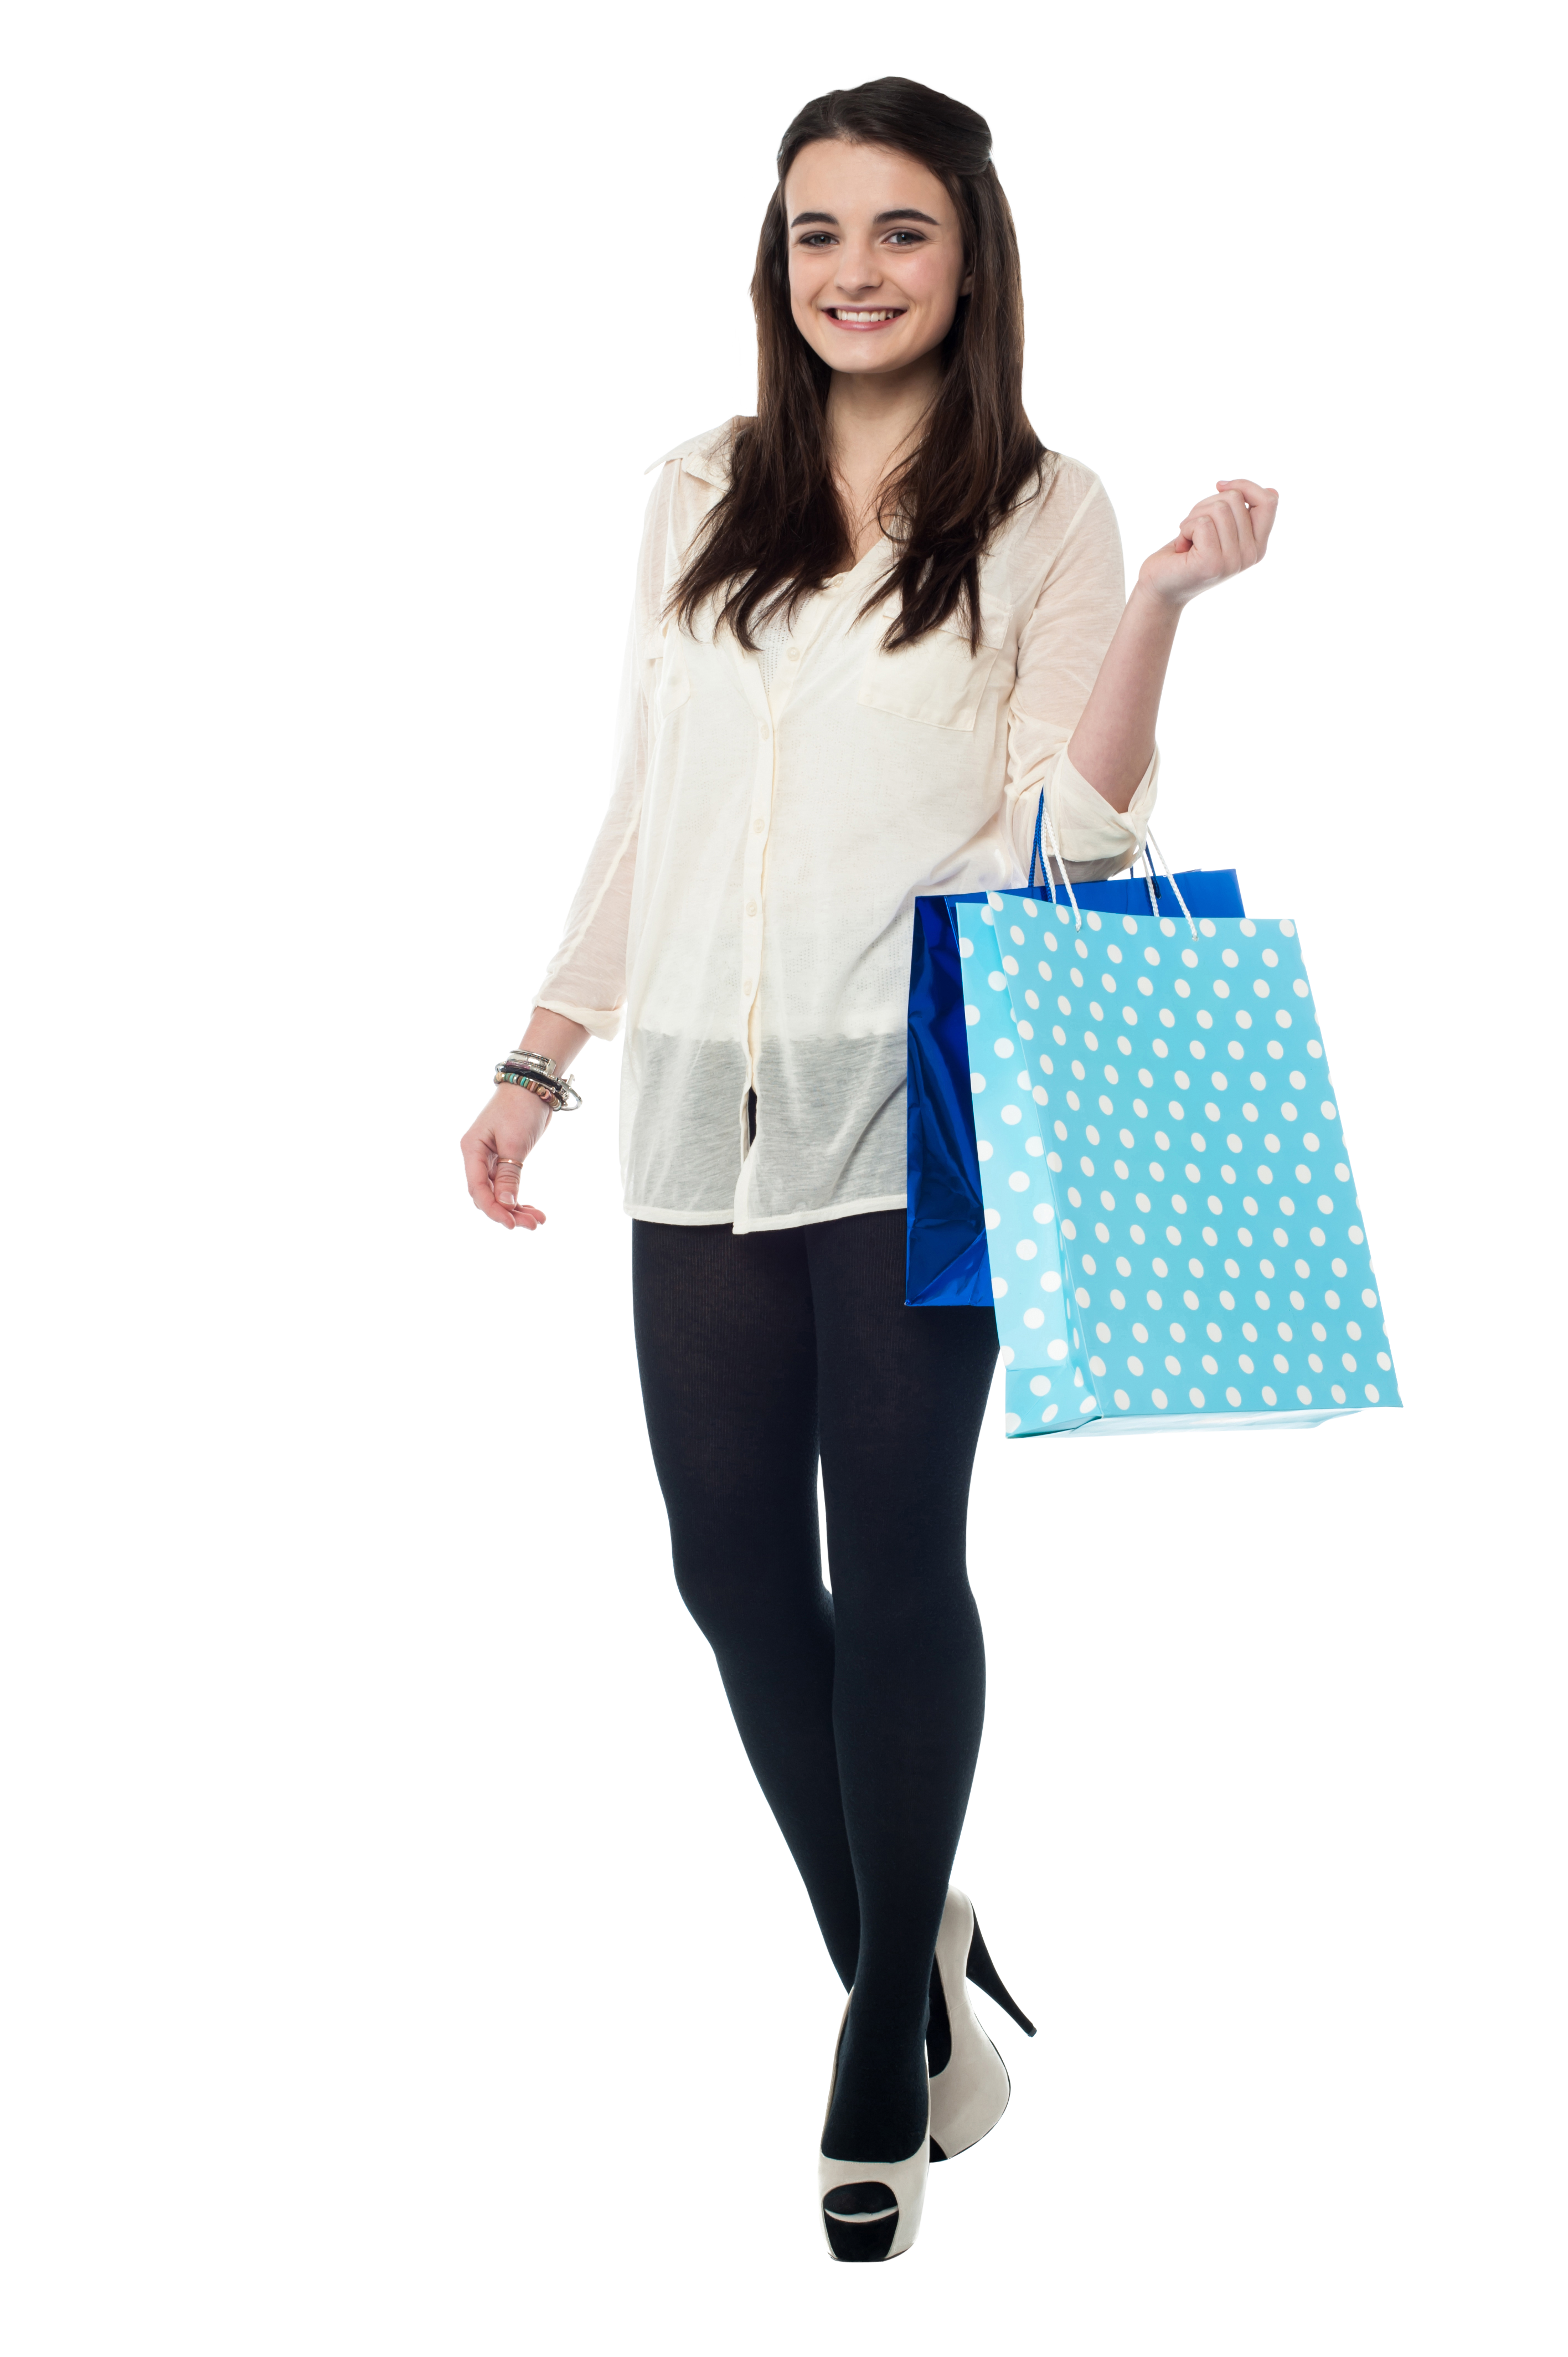 Women Shopping PNG HD Images Transparent